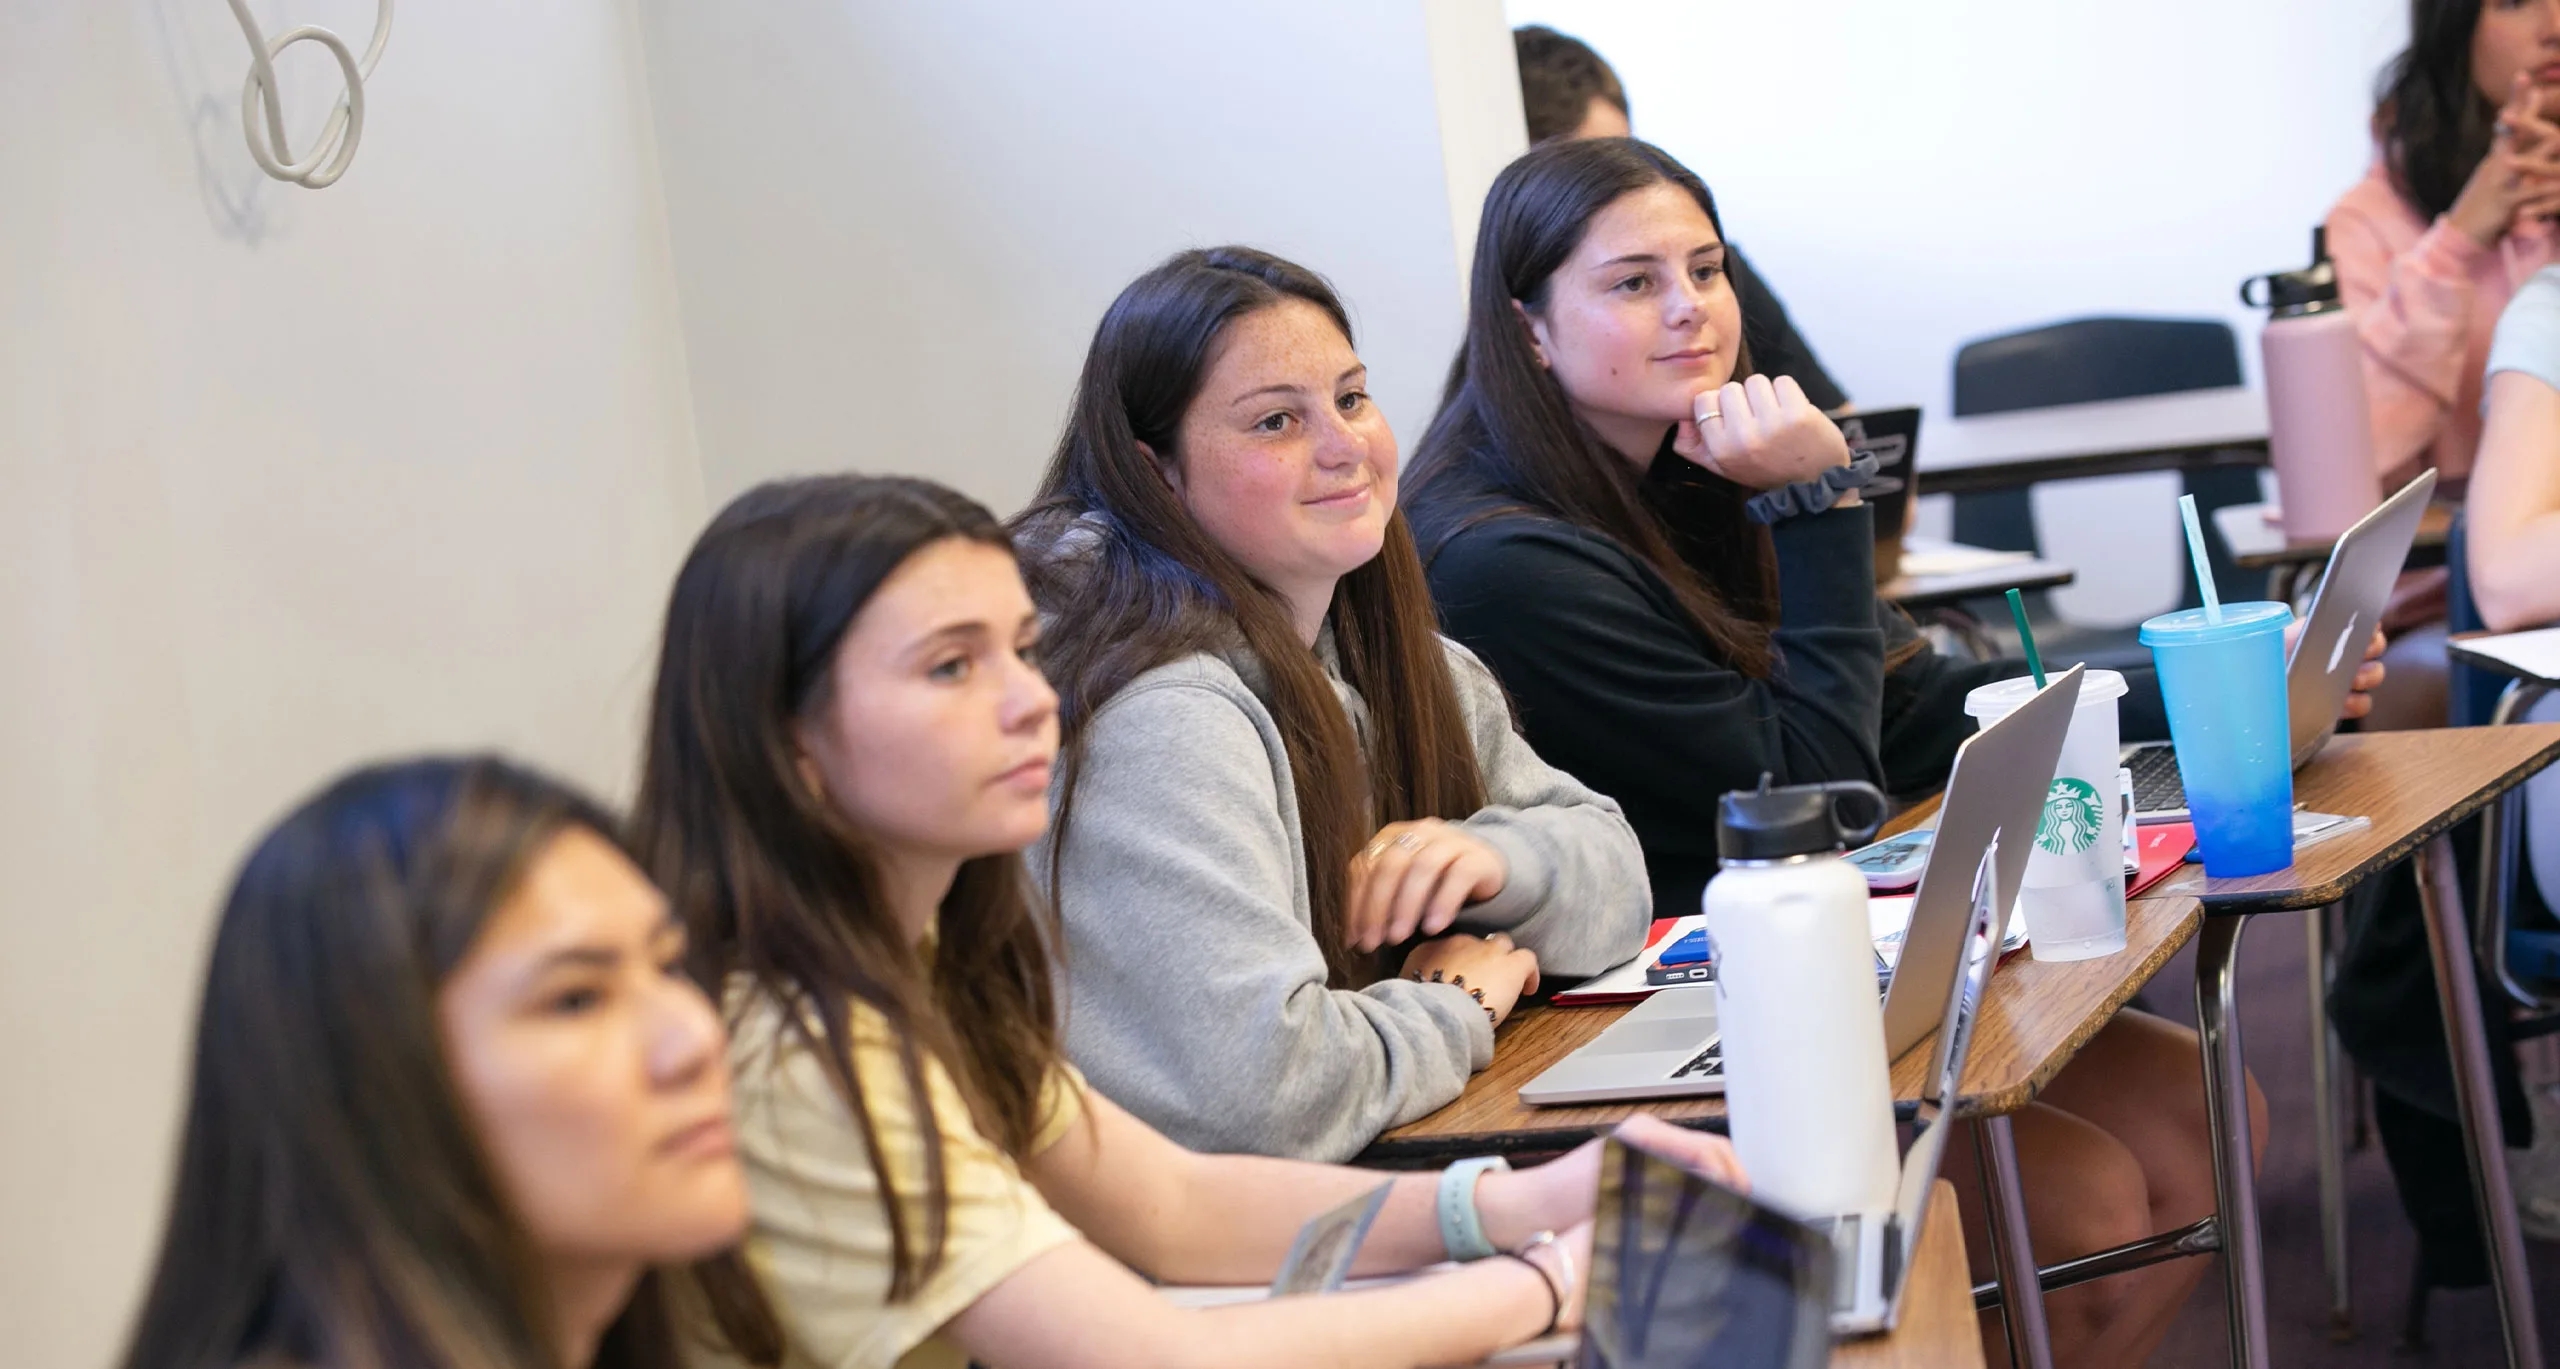 Assumption University students engage in classroom learning